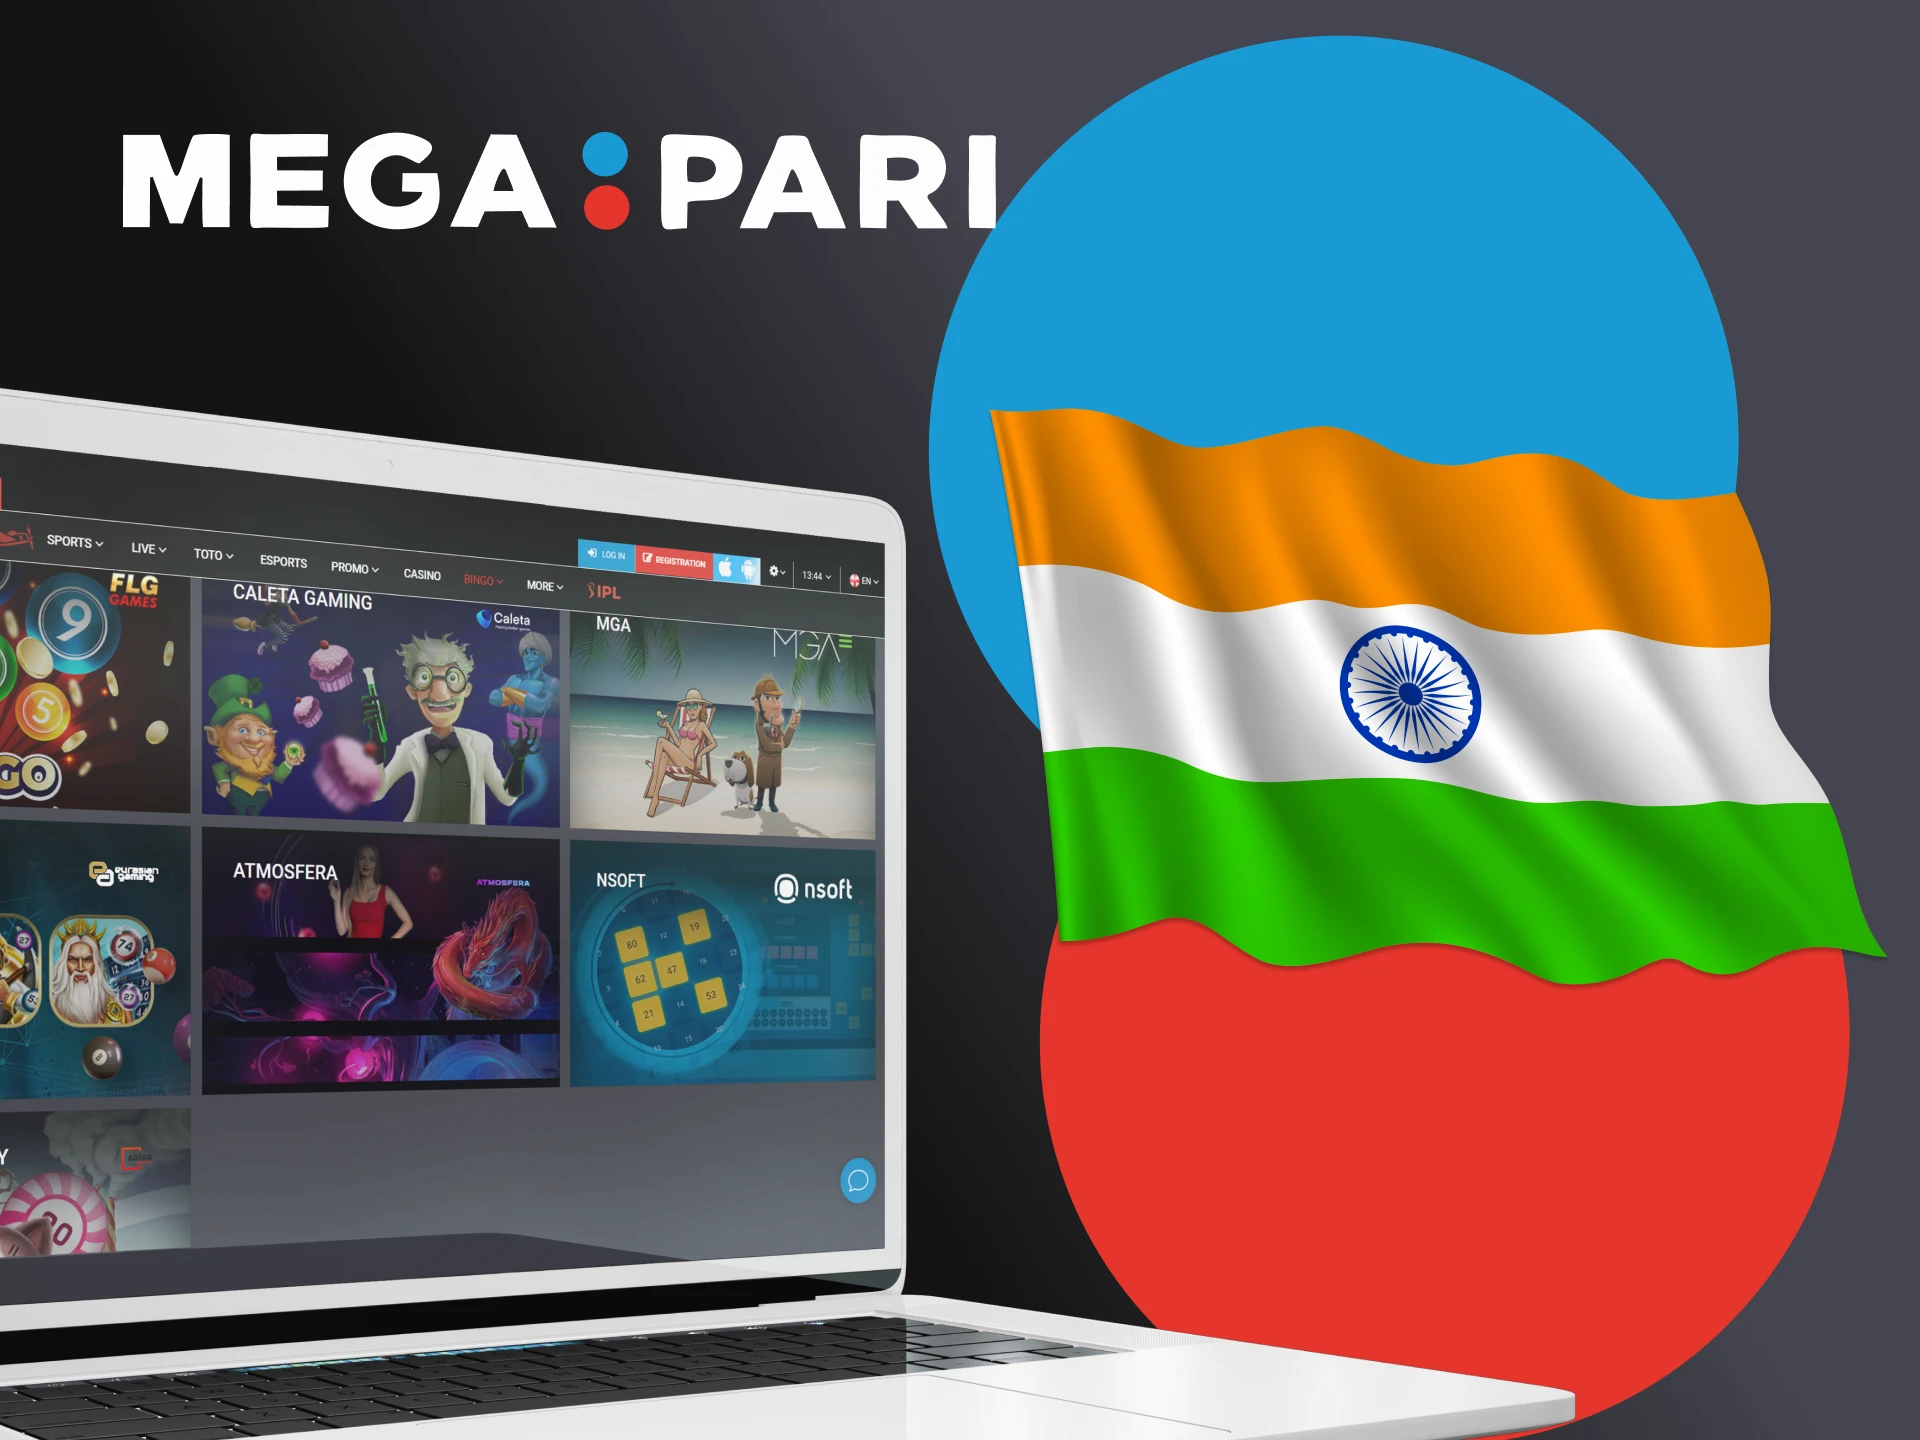 You can find out in which regions of India Megapari is allowed.